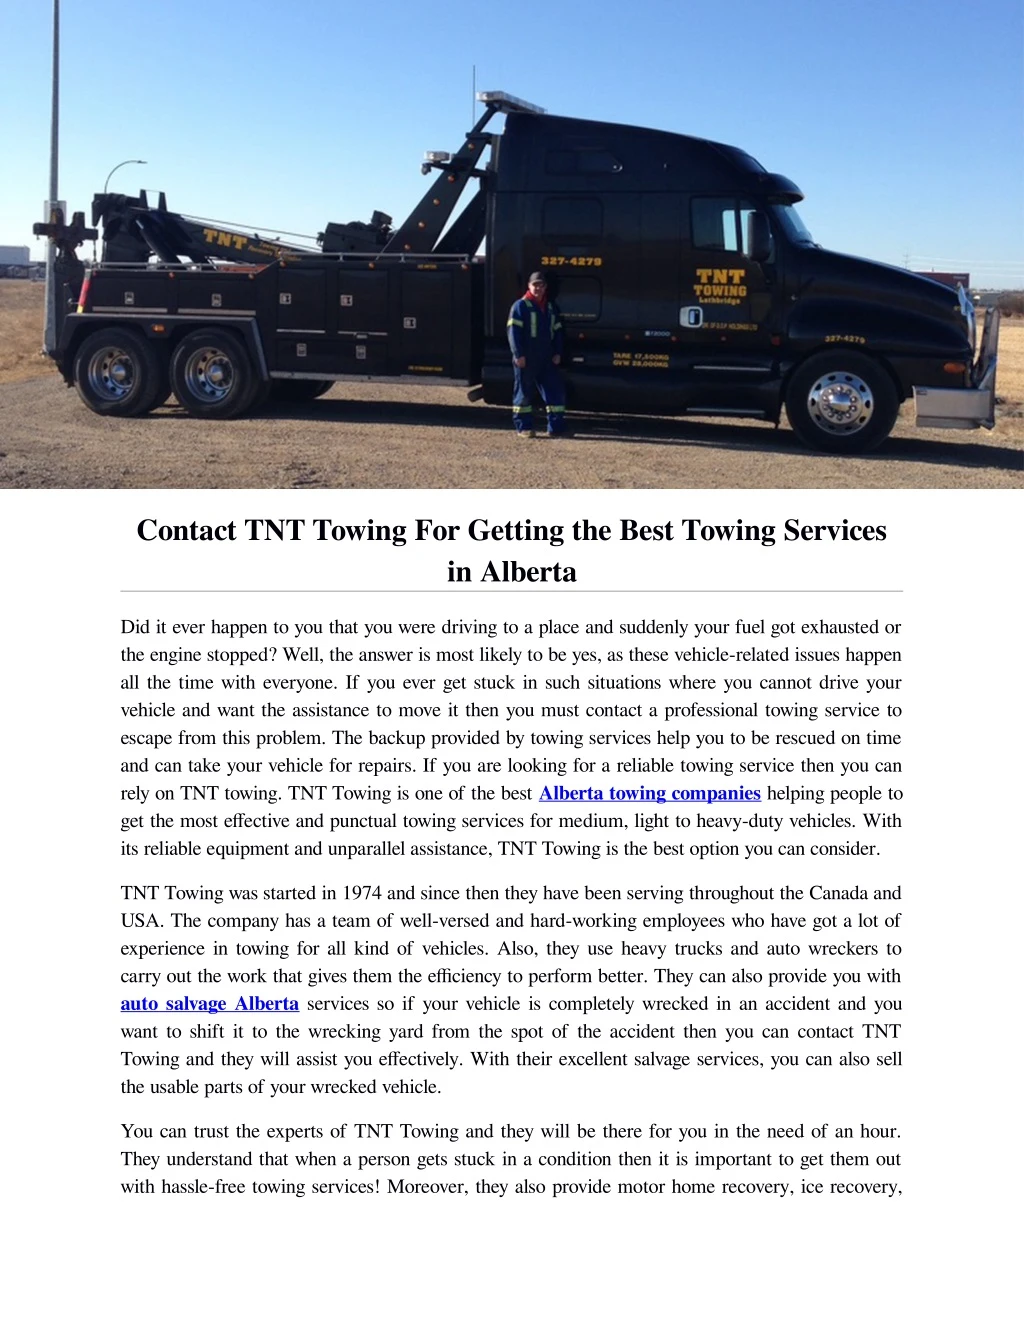 contact tnt towing for getting the best towing